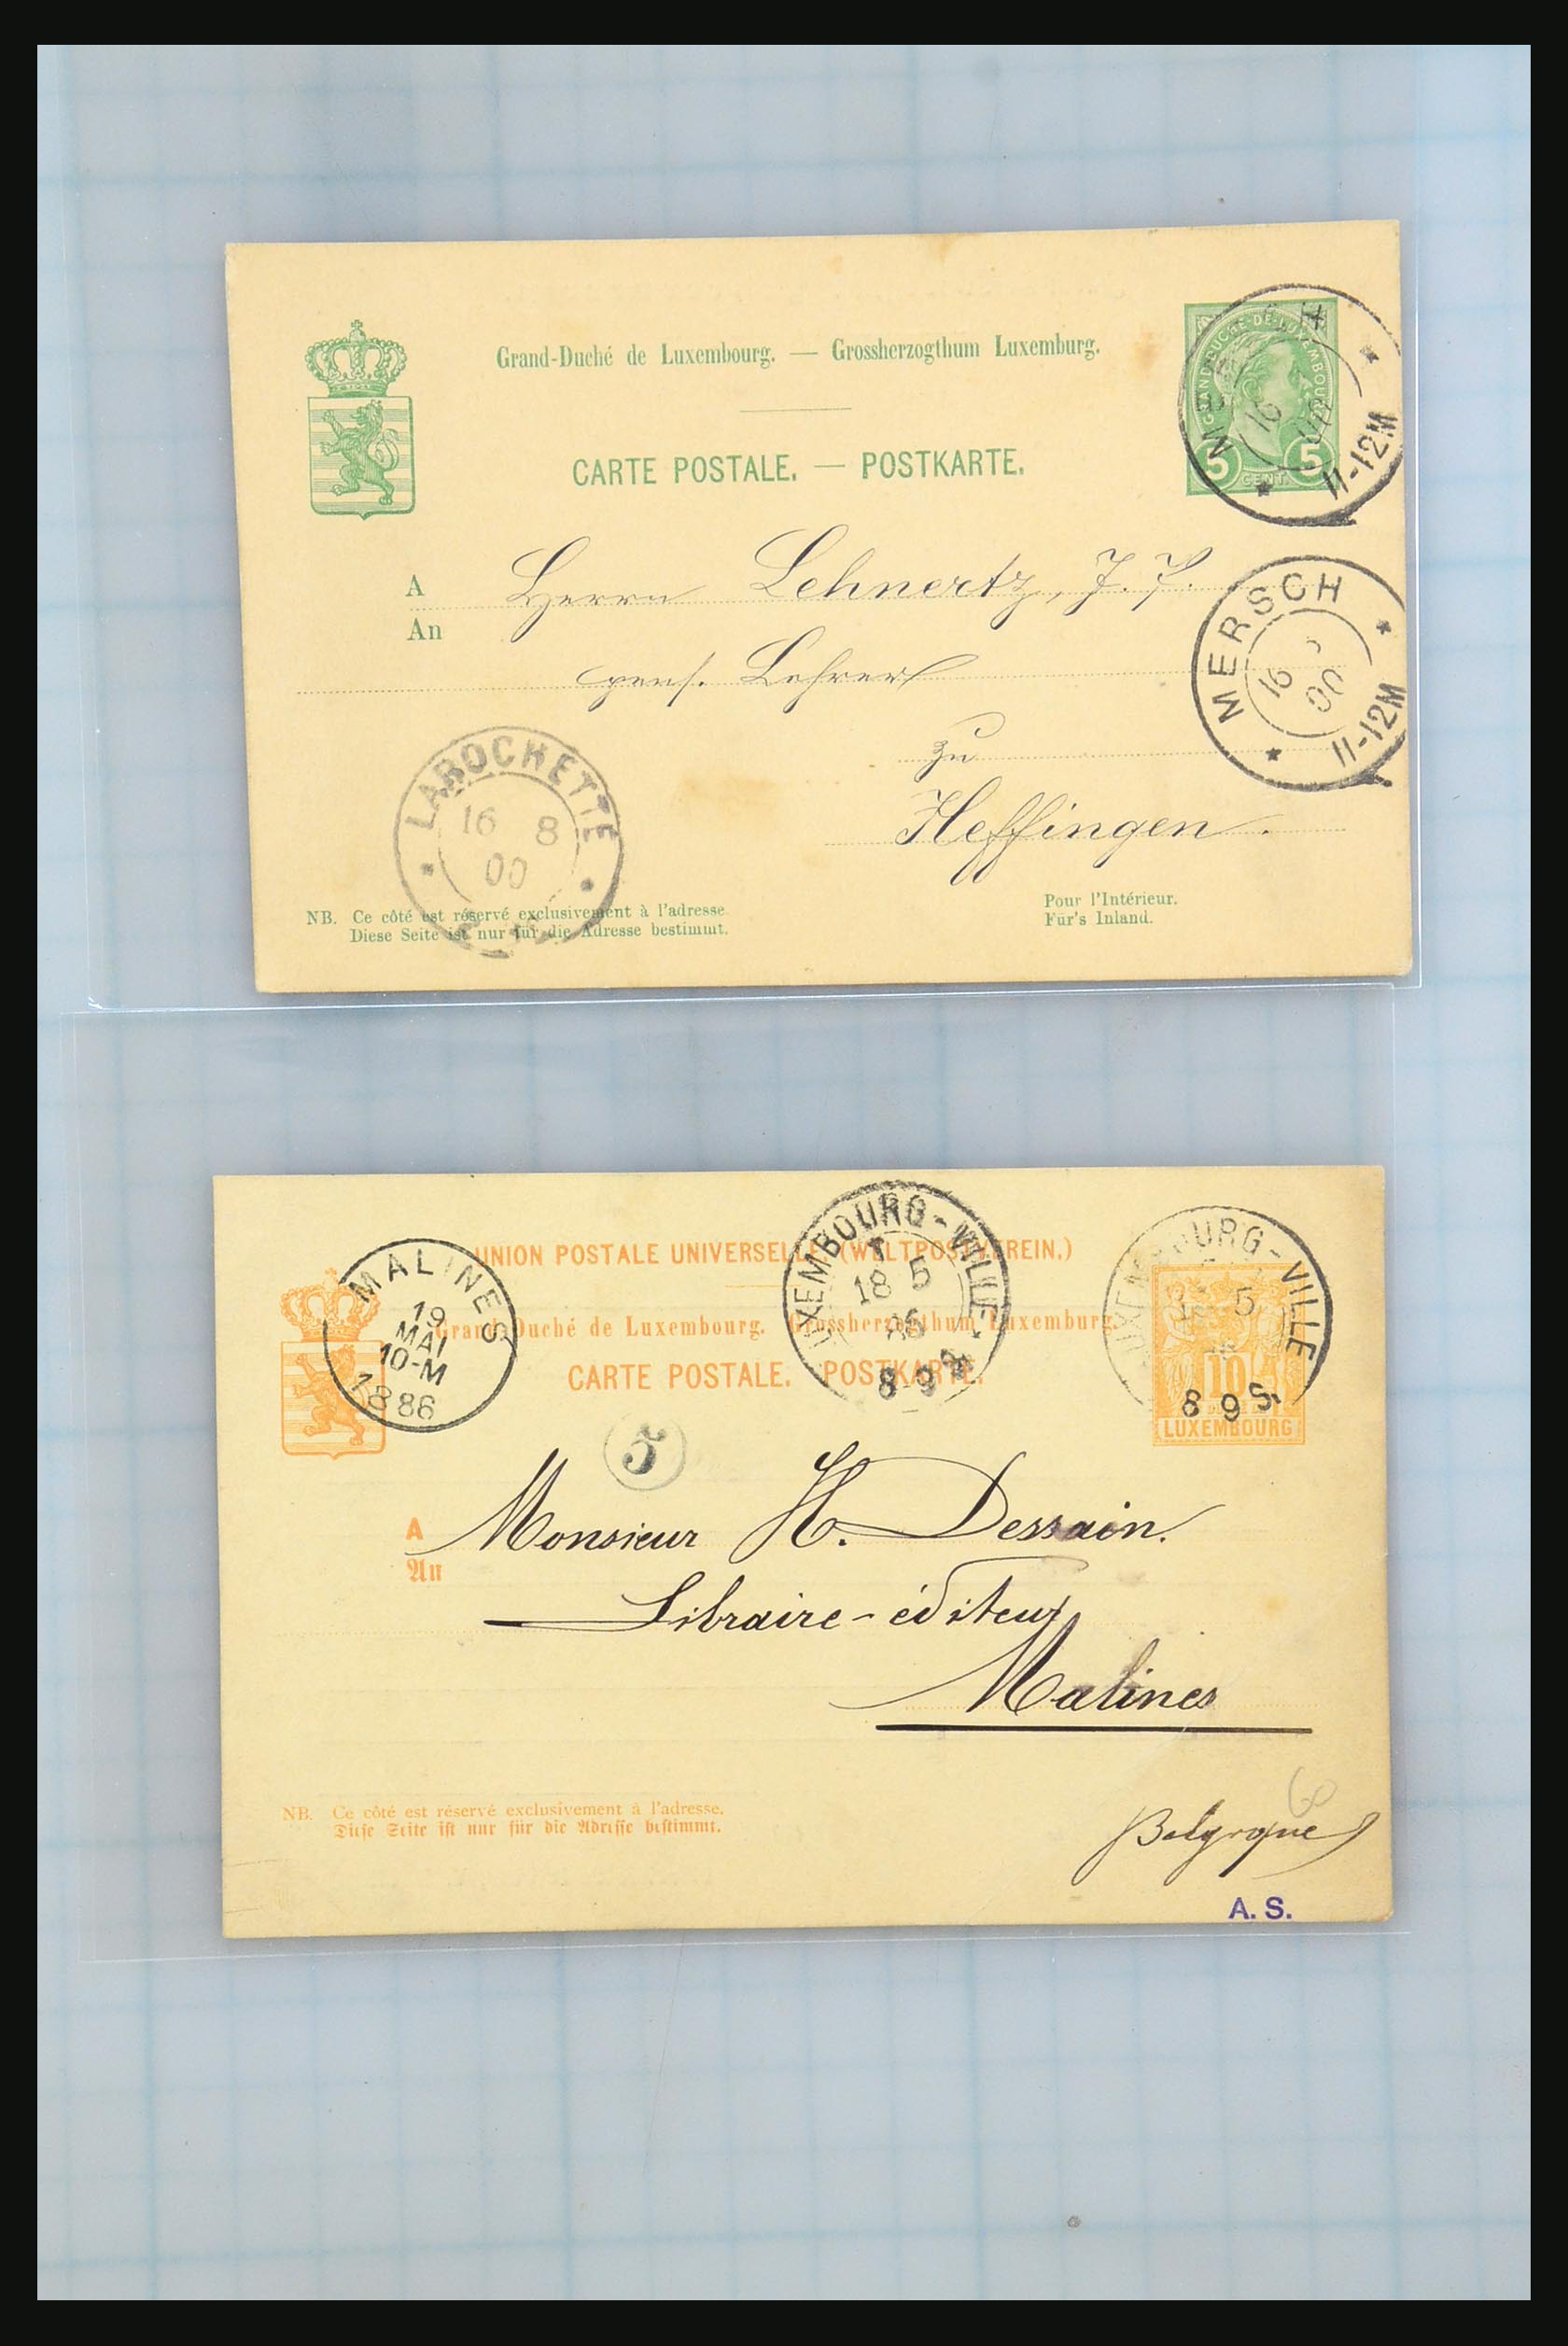 31358 059 - 31358 Portugal/Luxemburg/Greece covers 1880-1960.